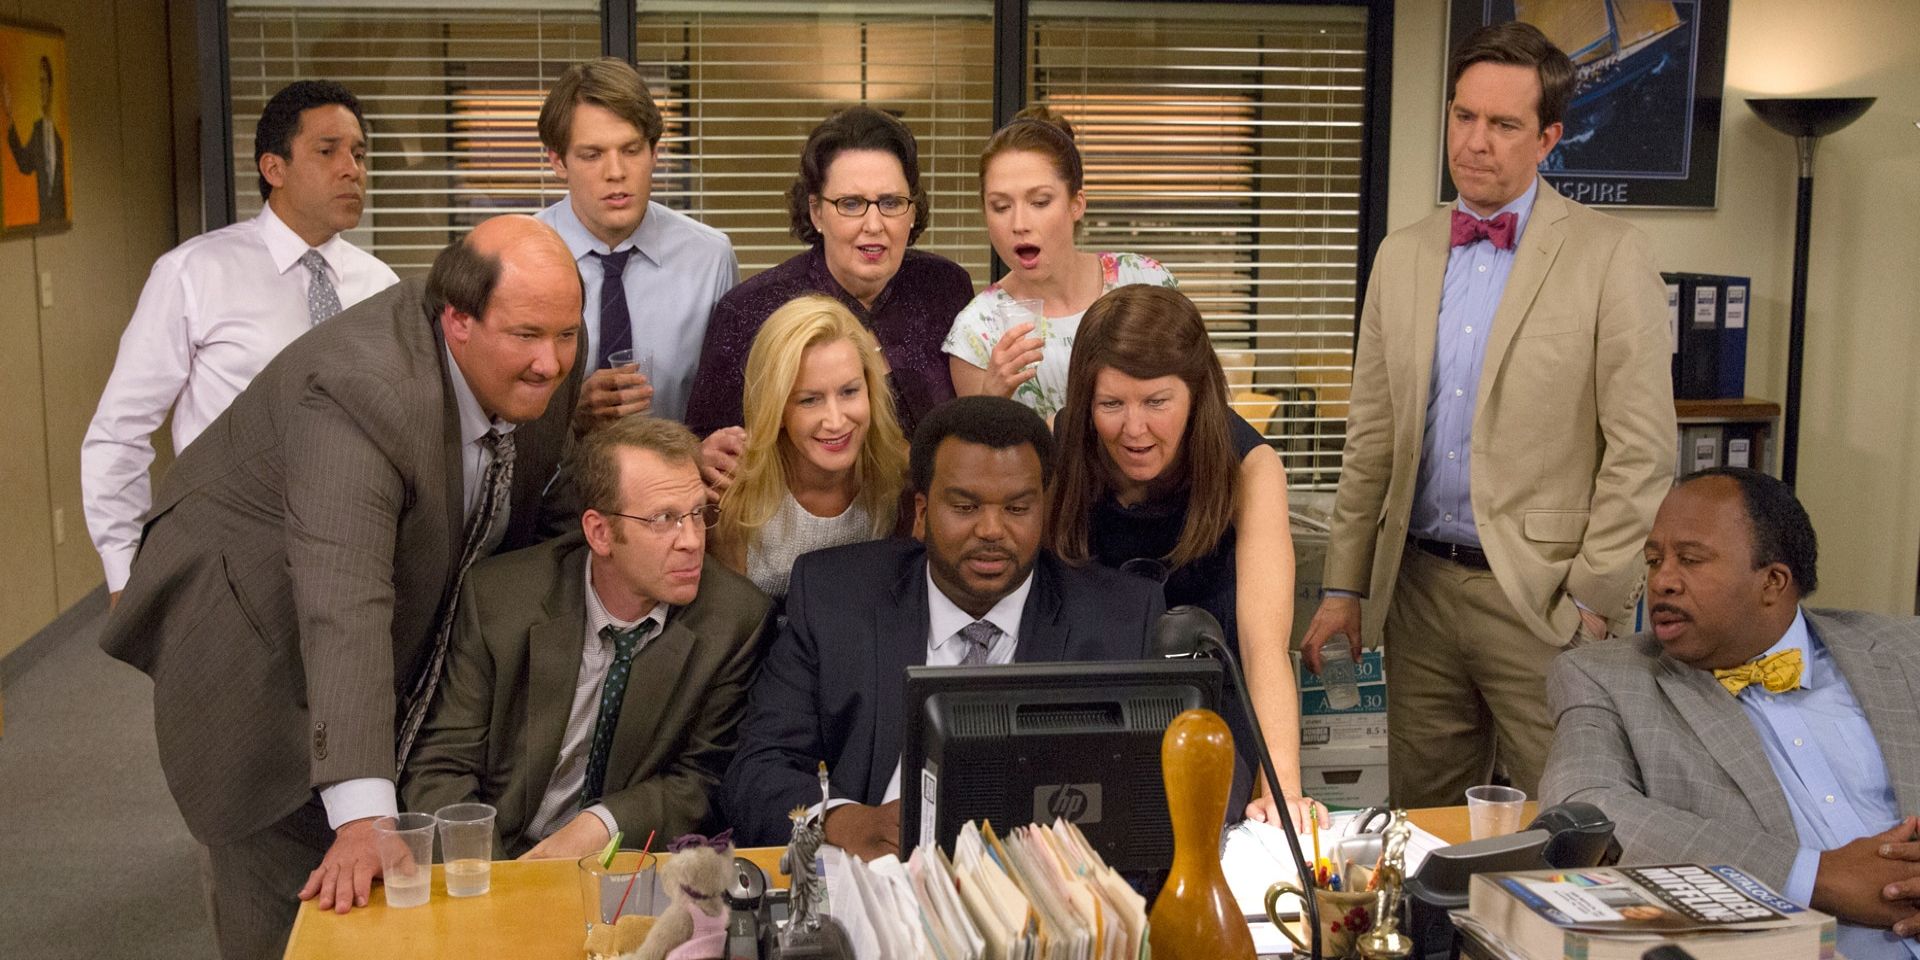 The Characters from The Office grouped together in the series' finale.